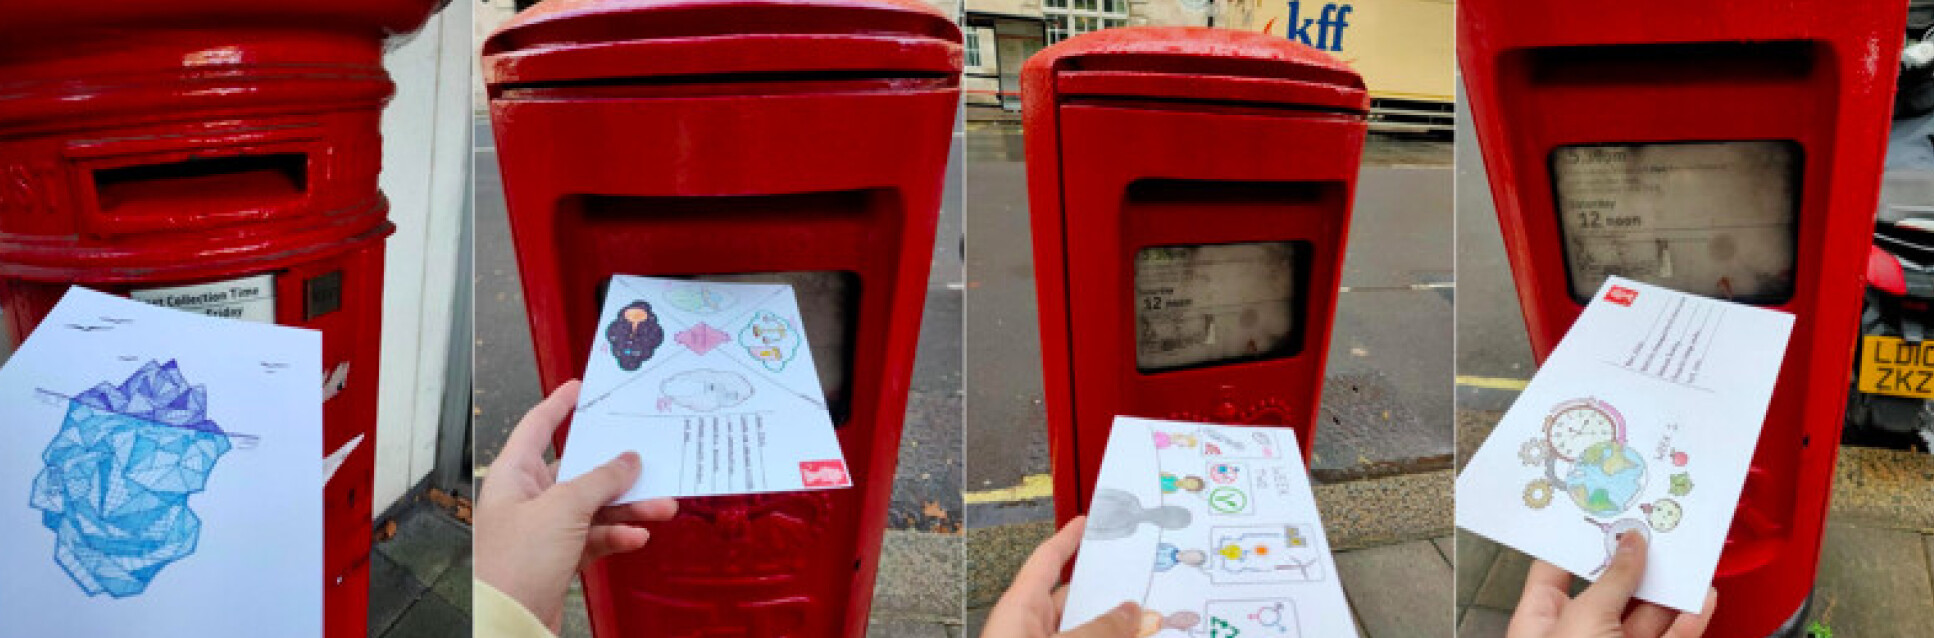 Hand-illustrated postcards being posted into 4 different red pillar boxes